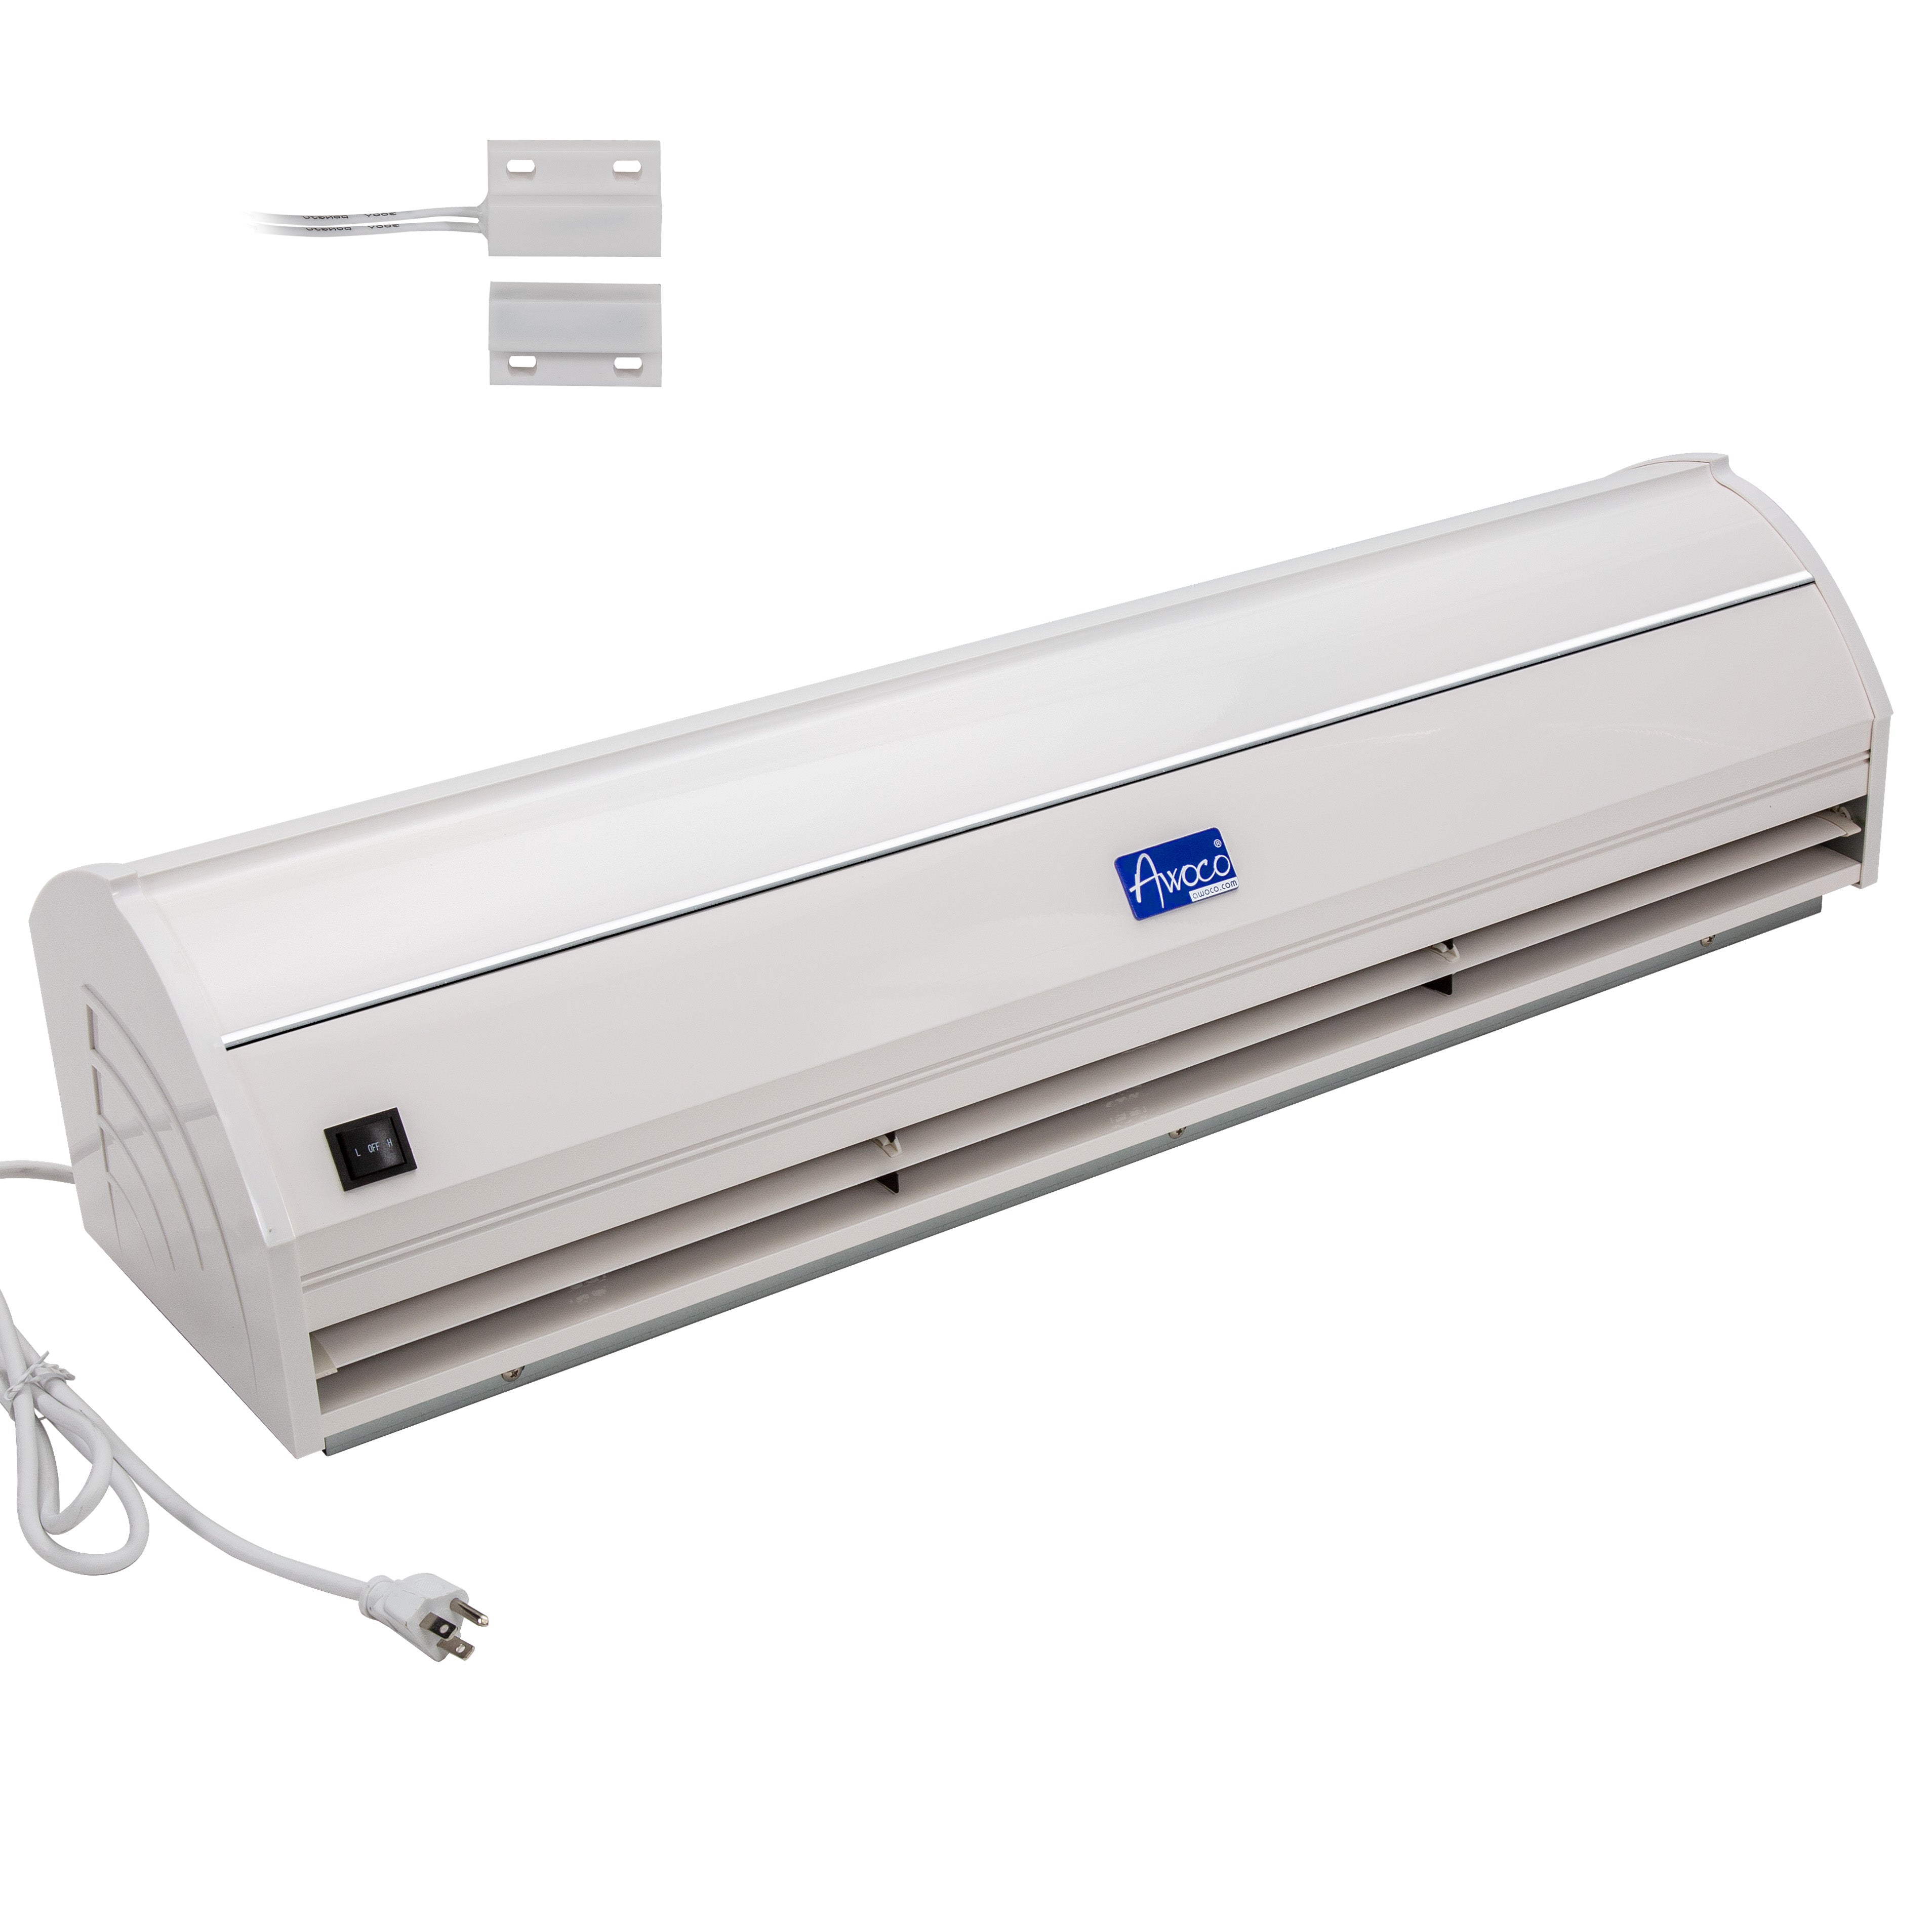 [Refurbished] Awoco AC21-K06 42” Elegant 2 Speeds 1000 CFM Indoor Air Curtain, UL Certified, 120V Unheated with an Easy-Install Magnetic Door Switch